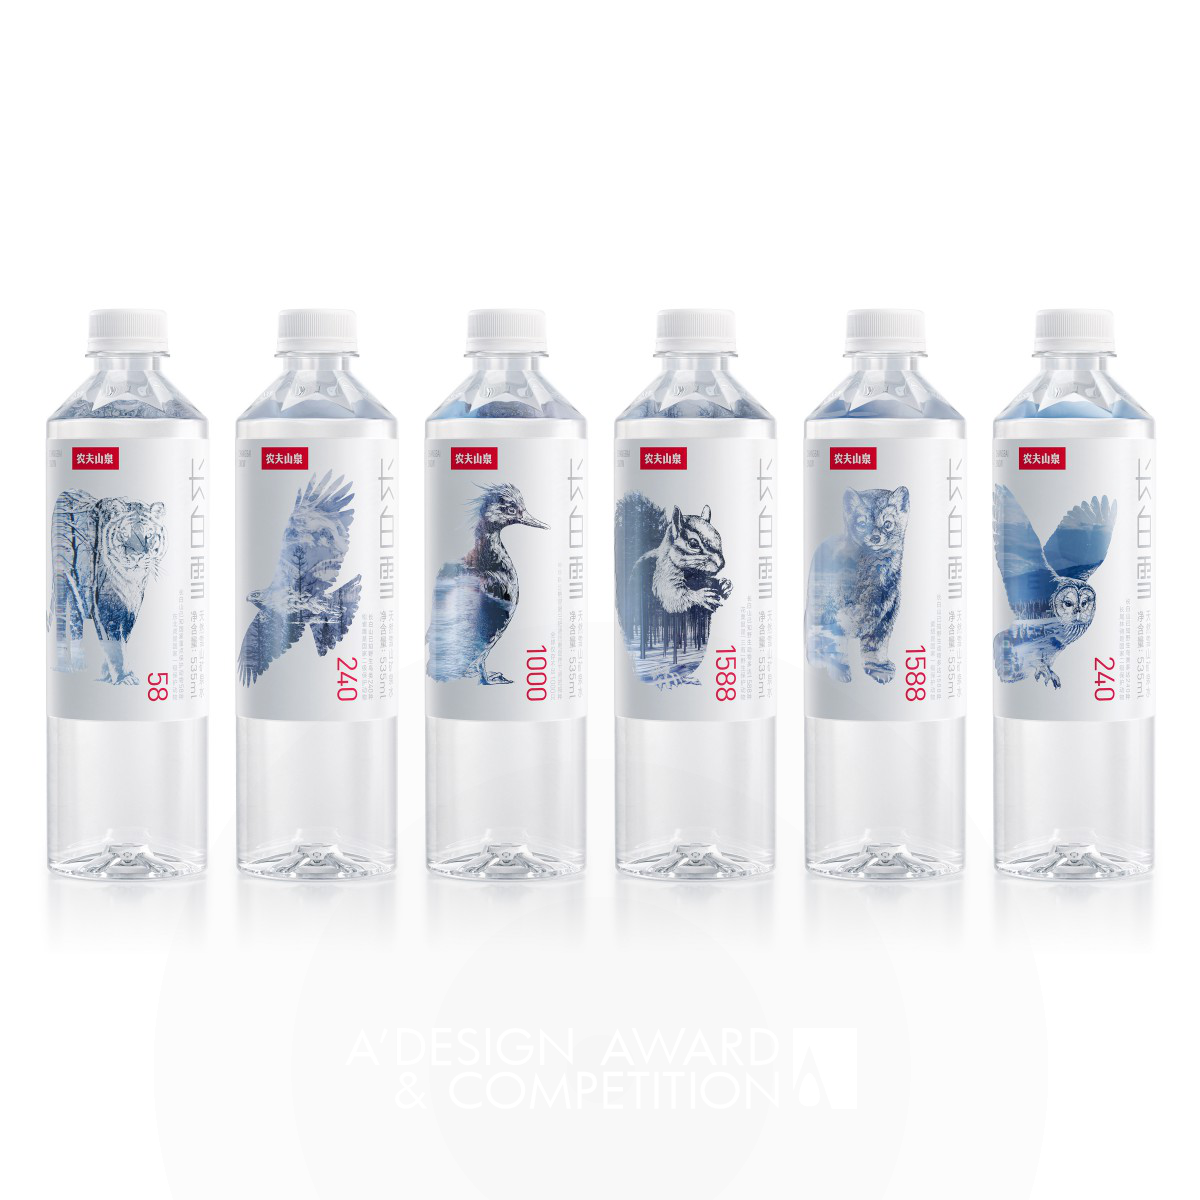 Changbai Snow Packaging For Mineral Water by 37°Design